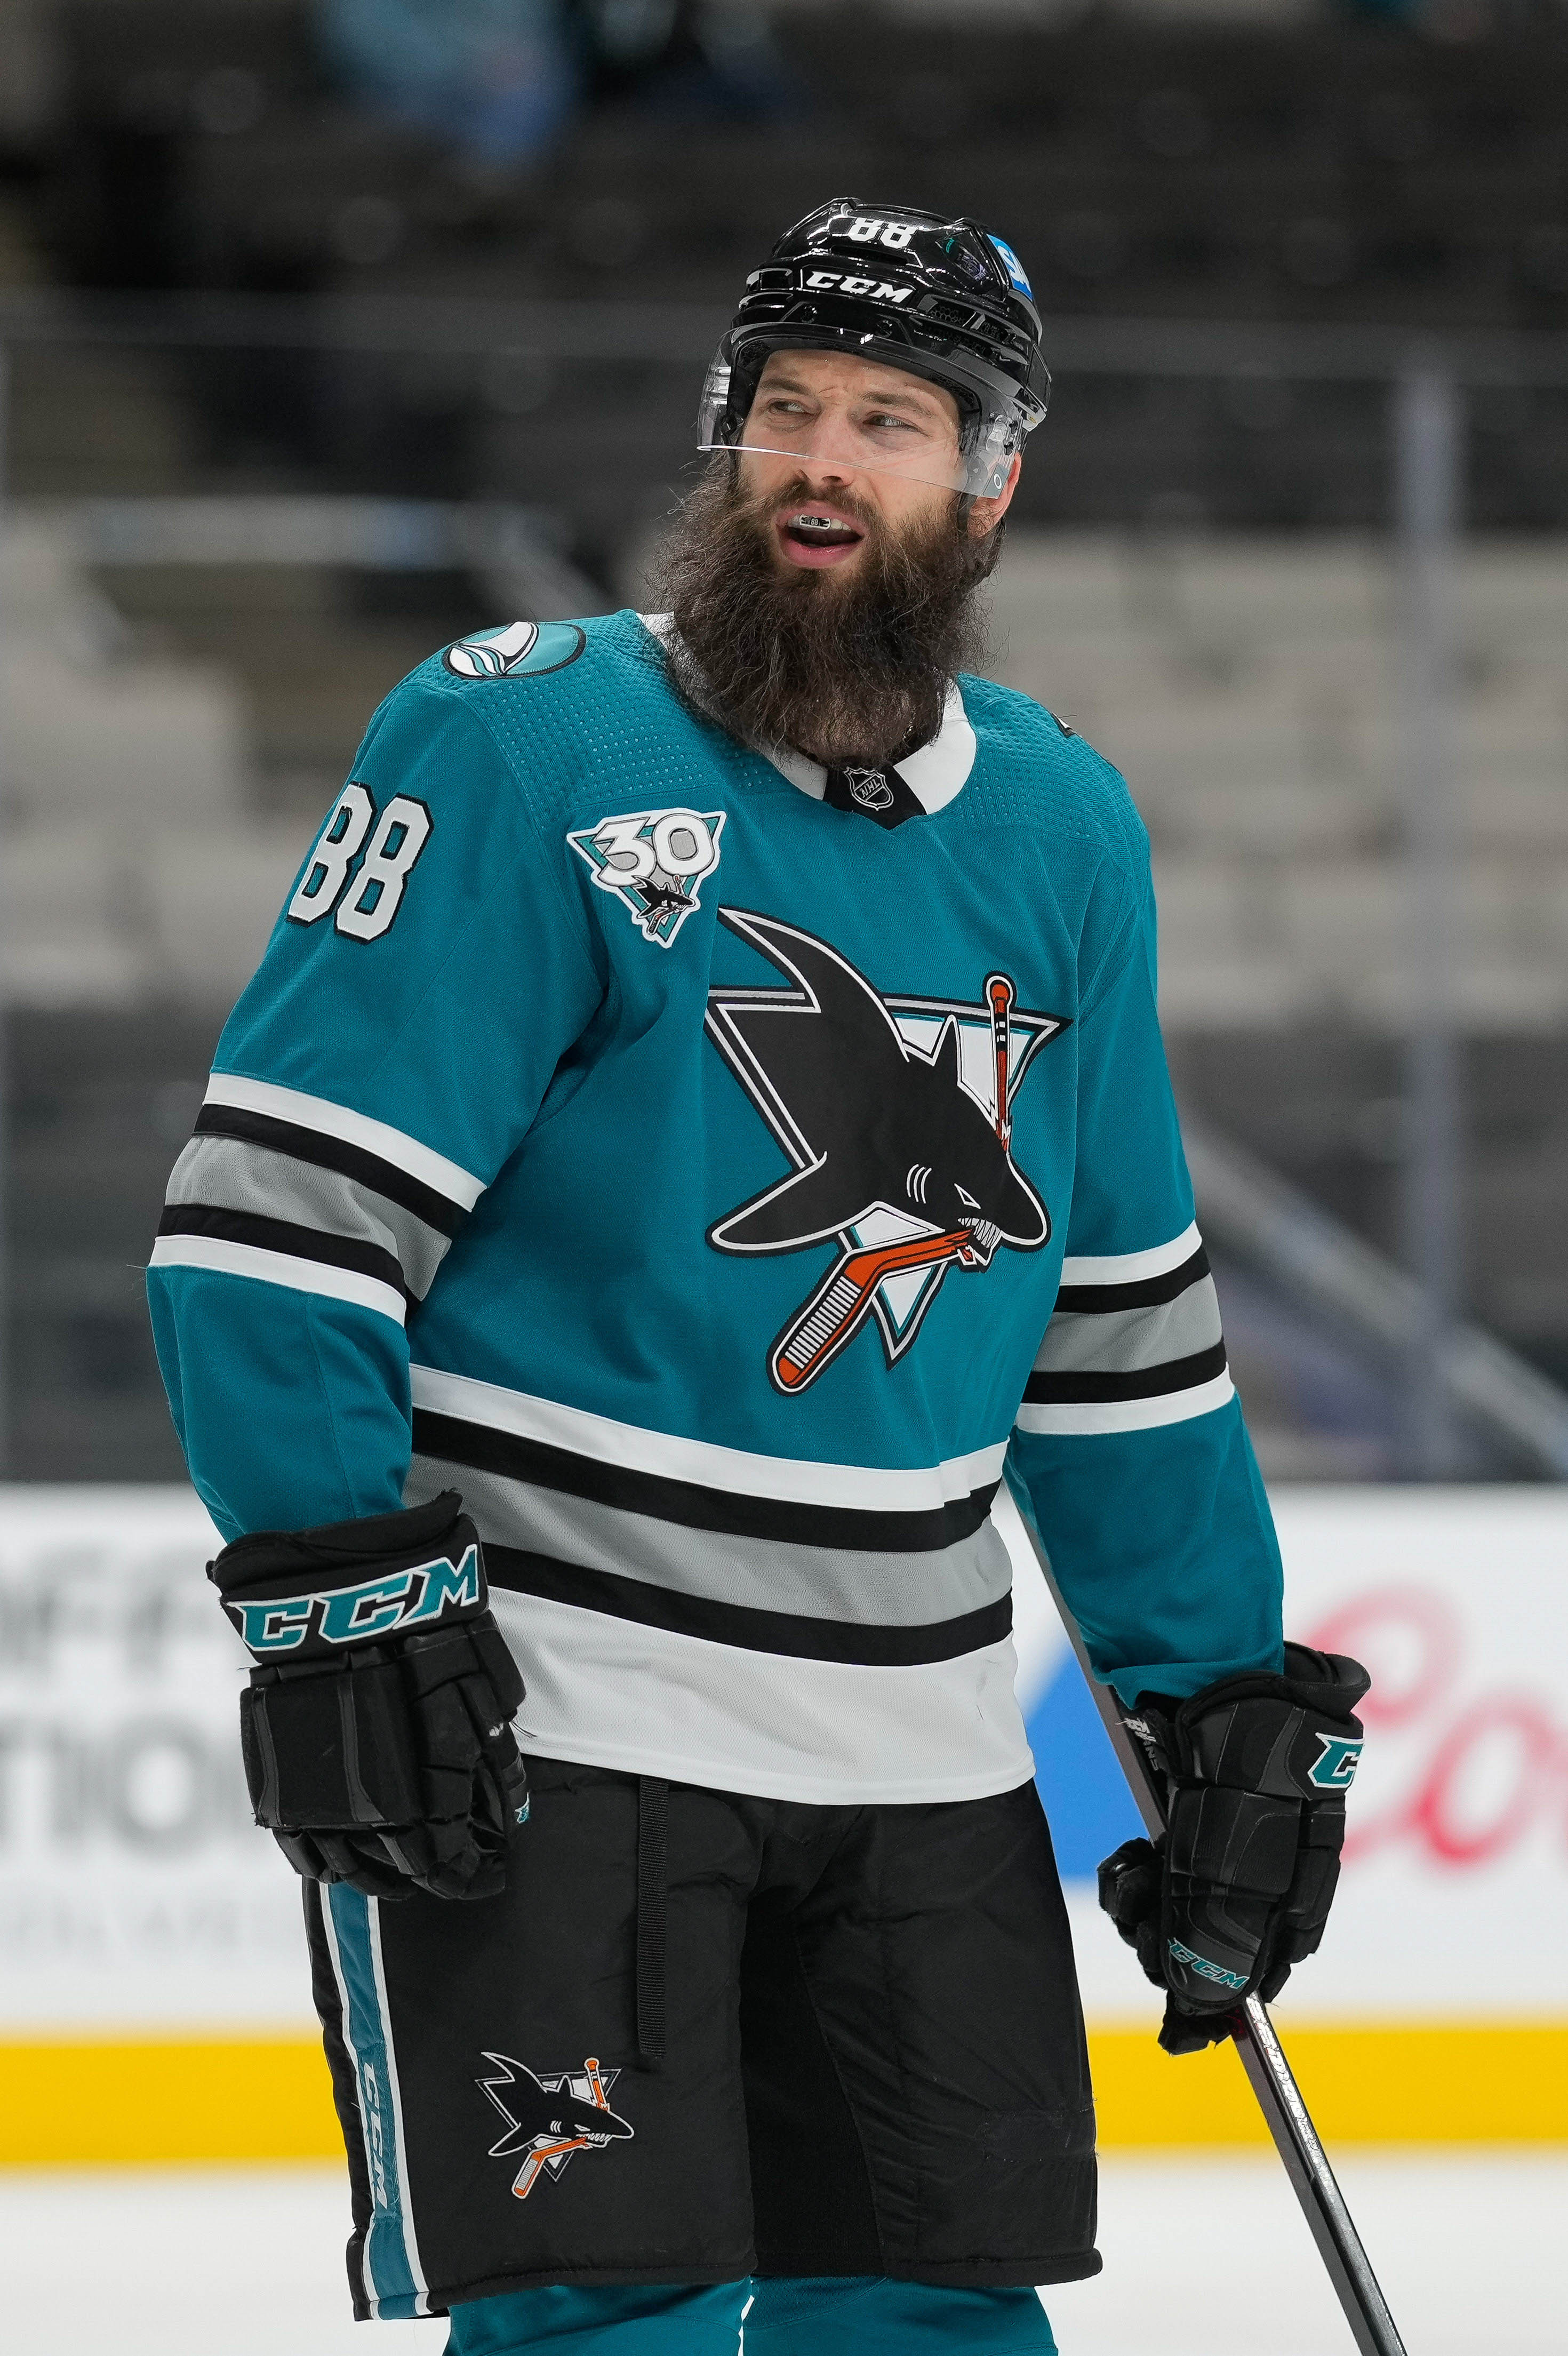 NHL Rumors: UFAs That Could Be Moved, Brent Burns, Edmonton Oilers